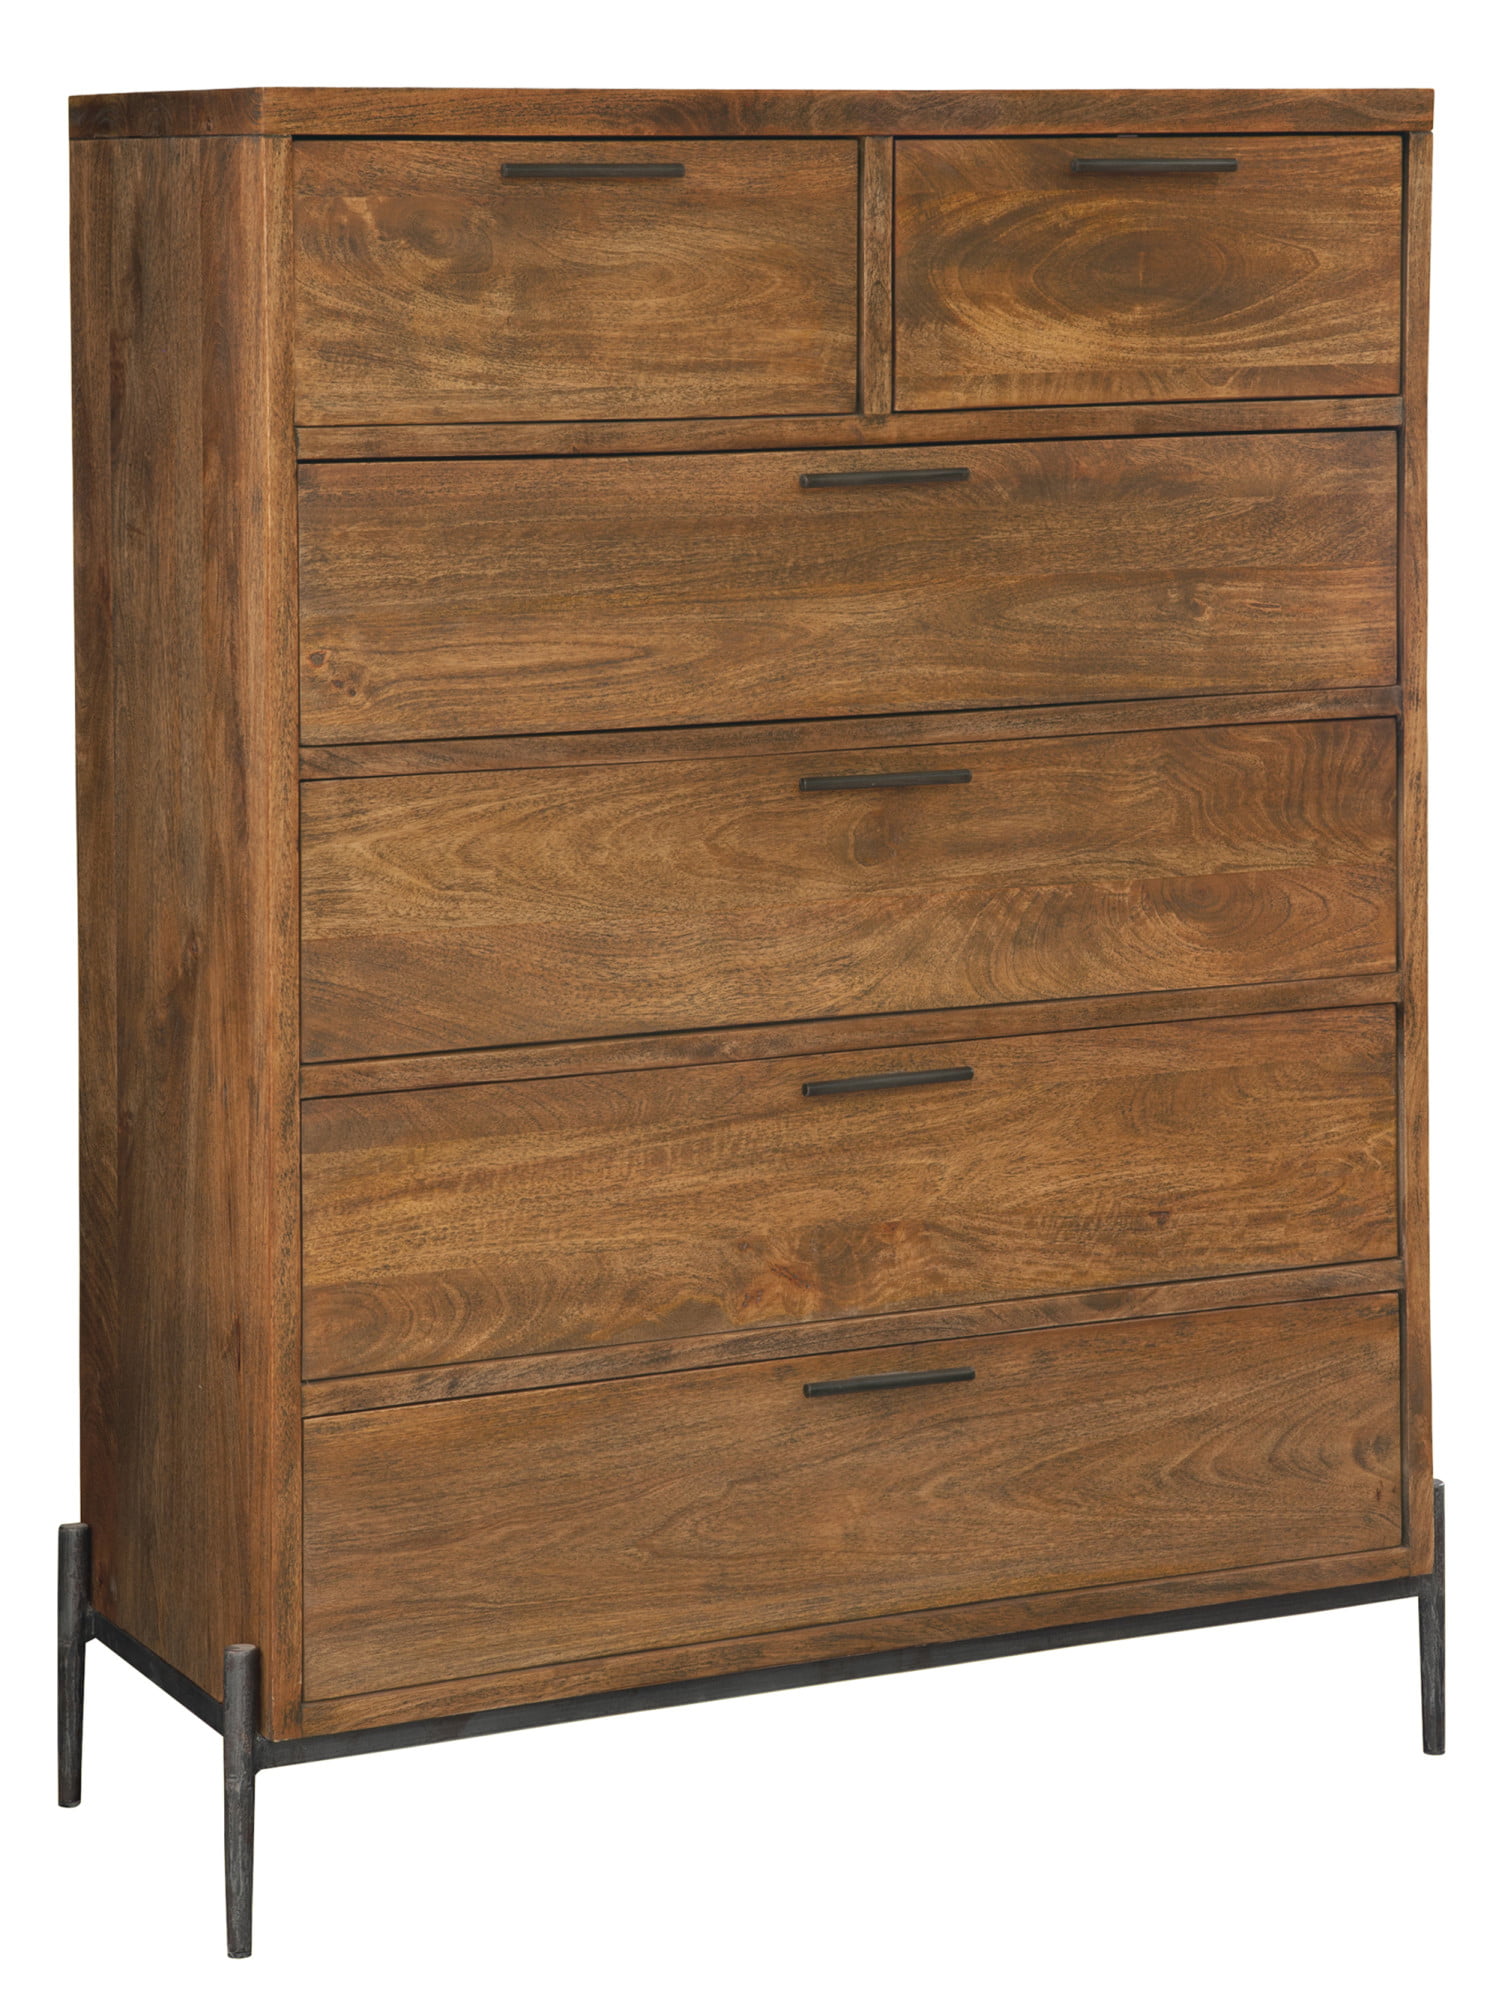 Hekman 23761 Bedford Park 42 Inch Wide Wood Dresser With Six